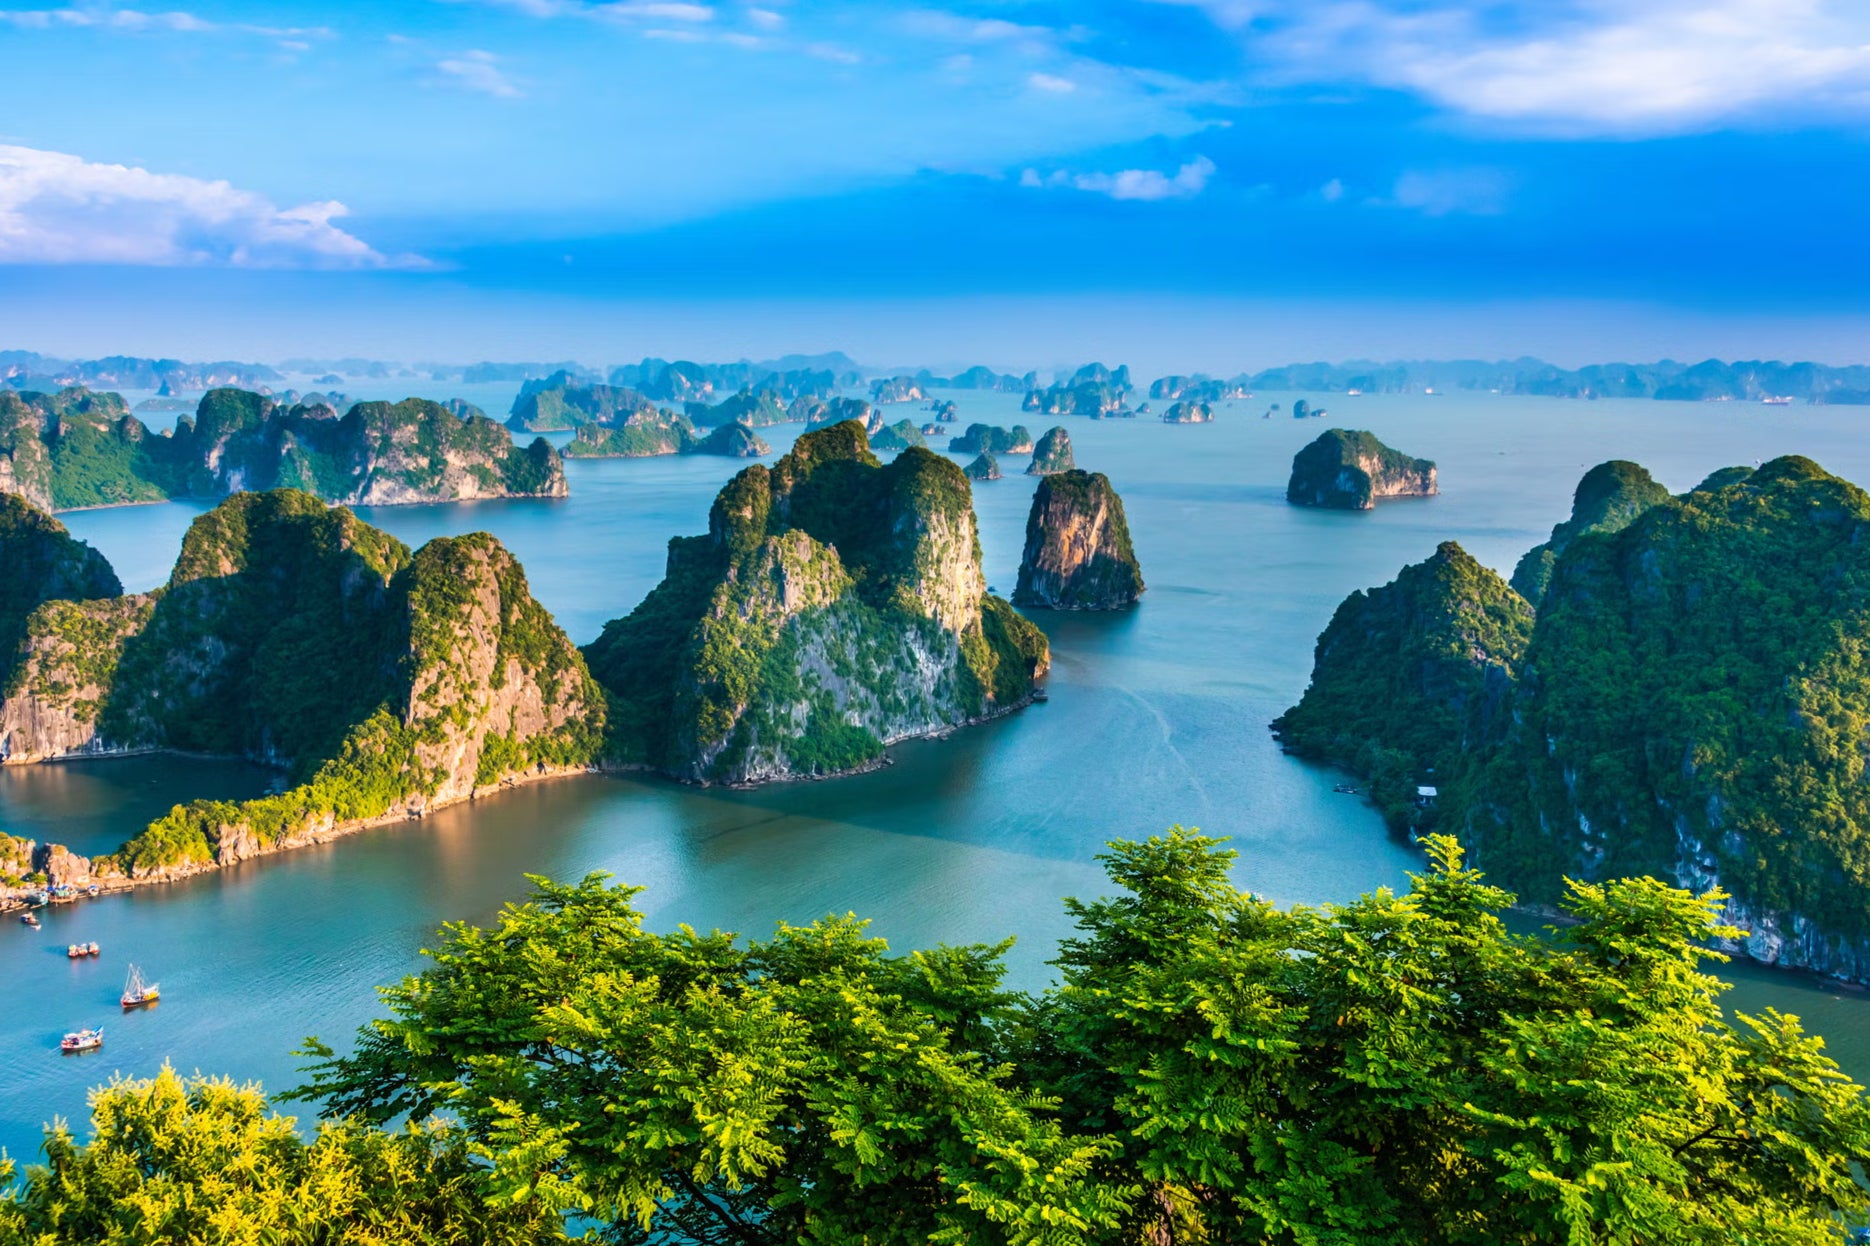 Top picks for a holiday in Vietnam include the floating rocks of Ha Long Bay